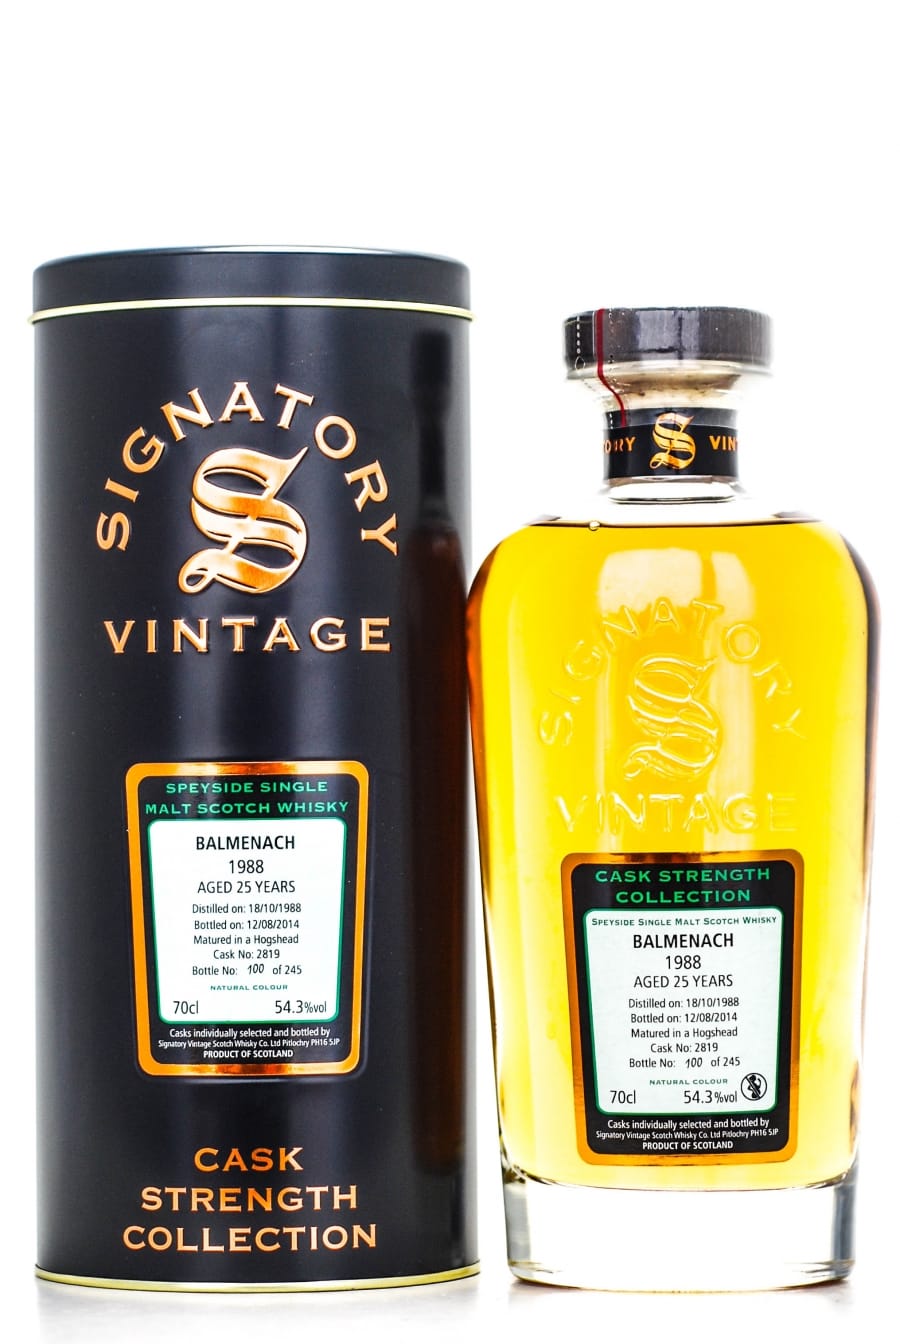 Balmenach - Balmenach 25 Years Old Signatory Vintage Cask Strength Collection Cask: 2819 1 Of 245 Bottles 54.3% 1988 In Original Container